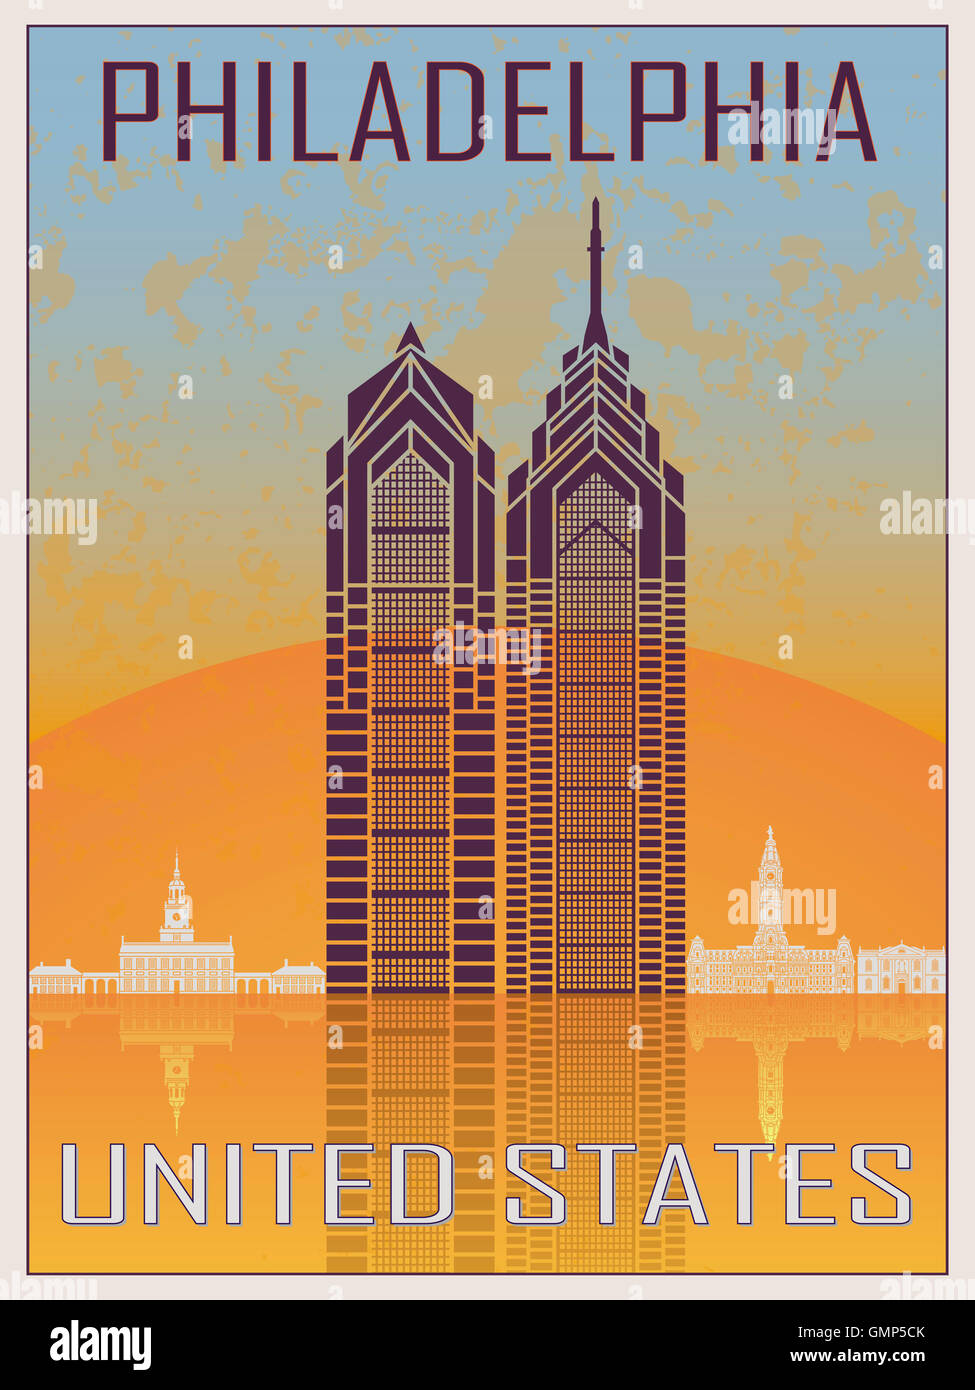 Philadelphia Vintage Poster in orange and blue textured background with skyline in white Stock Photo